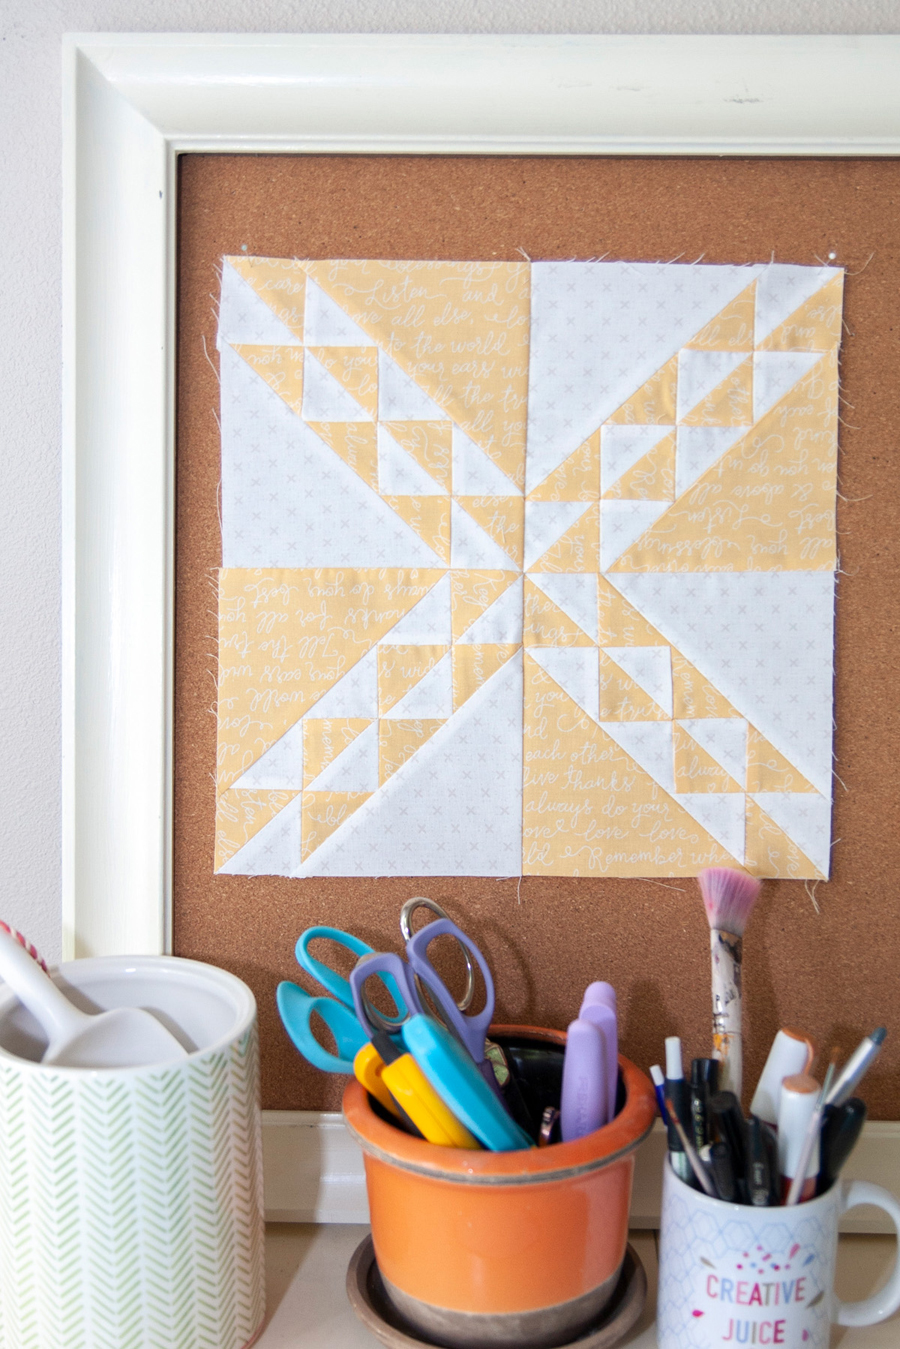 Moda Blockheads 2: free block of the week by Moda designers. Block 6 is "Patch Thru the Woods" by Betsy Chutchian.